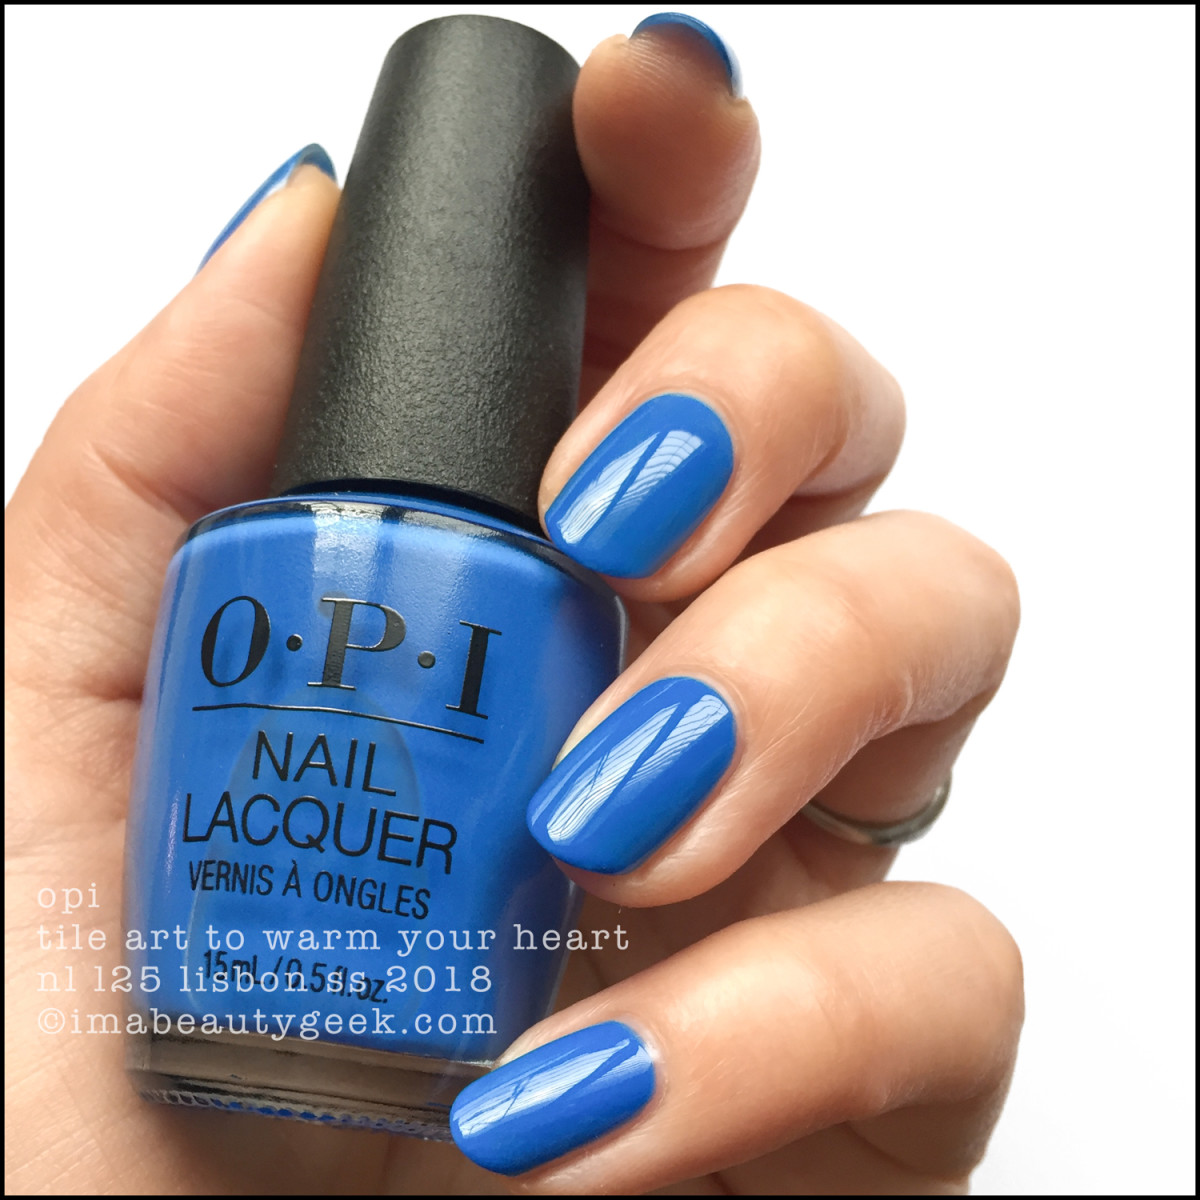 OPI Tile Art To Warm Your Heart - OPI Lisbon Collection SS 2018